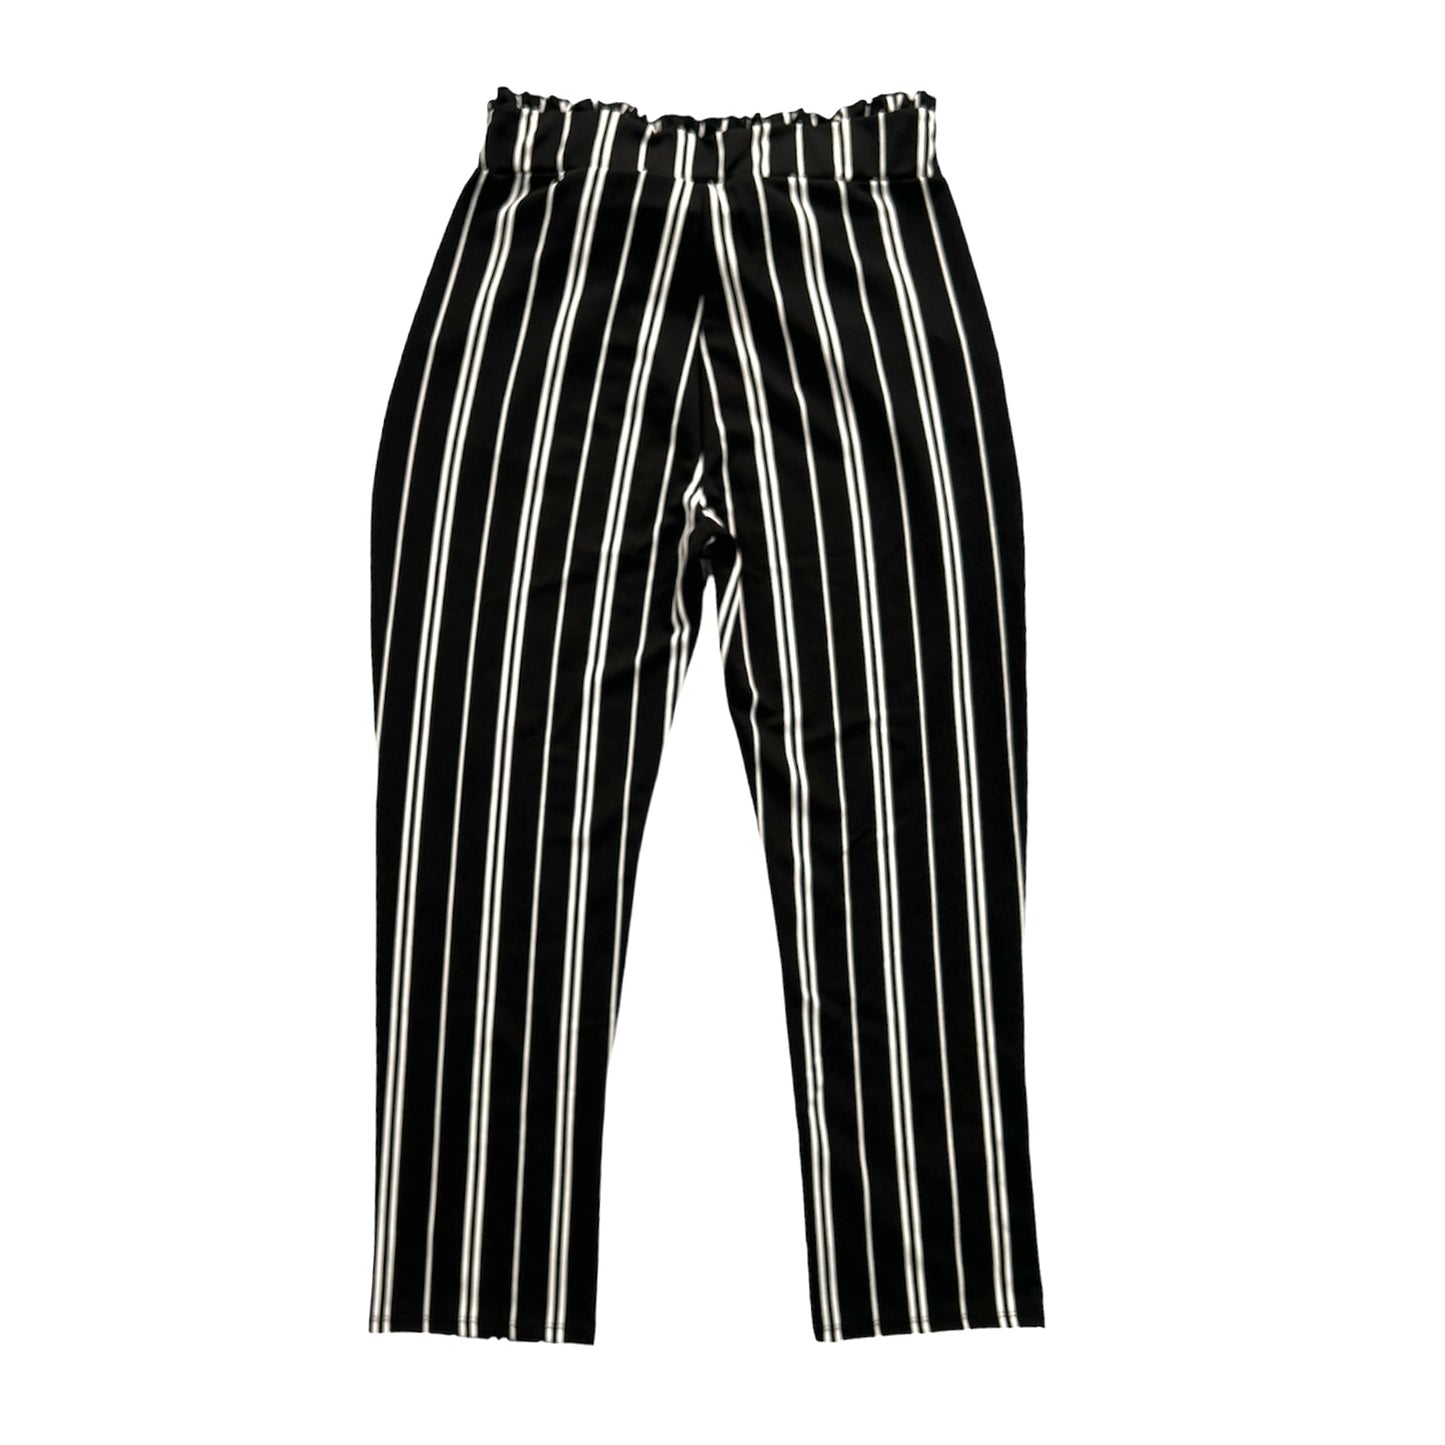 Casual Black/White Straight Leg Loose Fit High Rise Size M Women's Pants